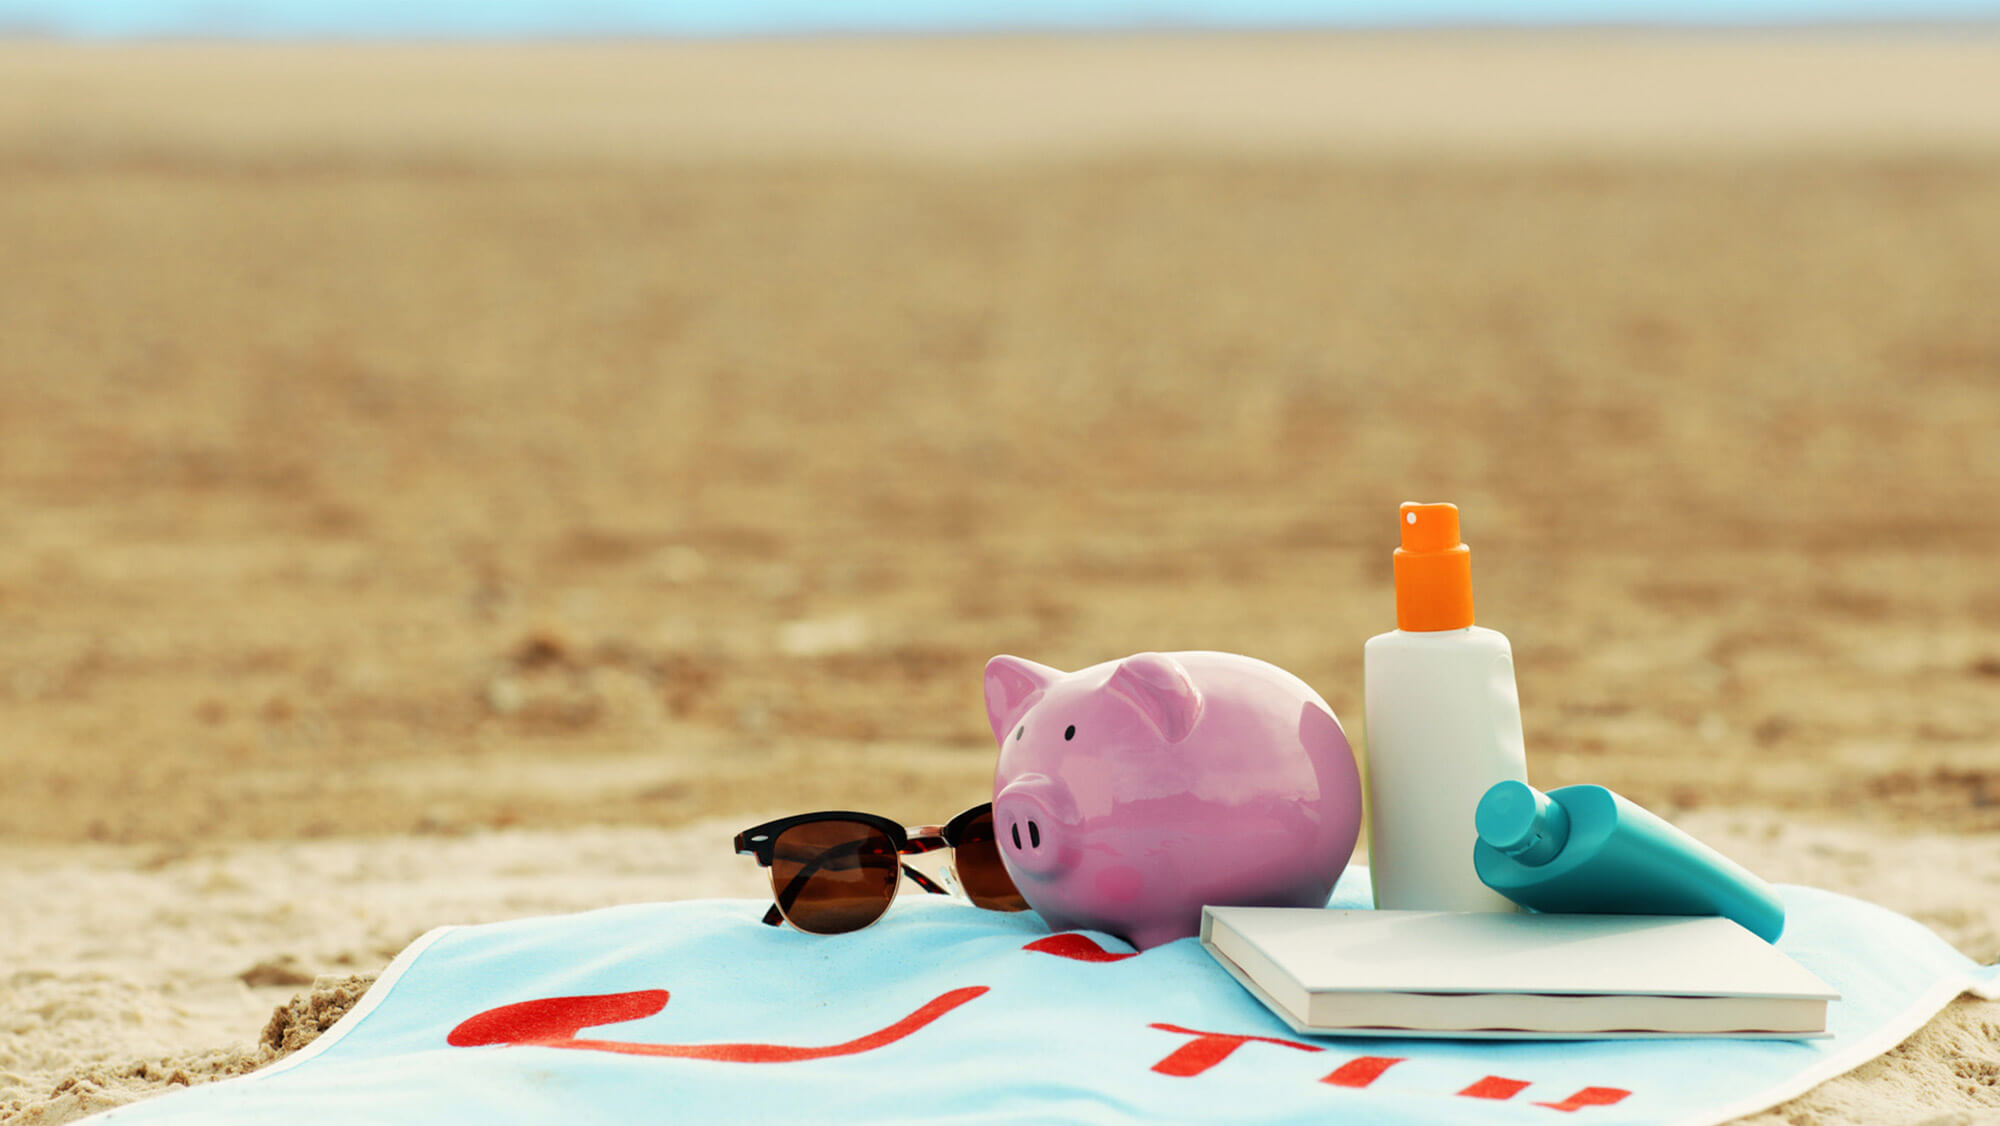 Piggy bank, sunglasses, sun cream and book on a beach towel in our Live Happy video for TUI and The Sun, from the Rise Media case studies archive